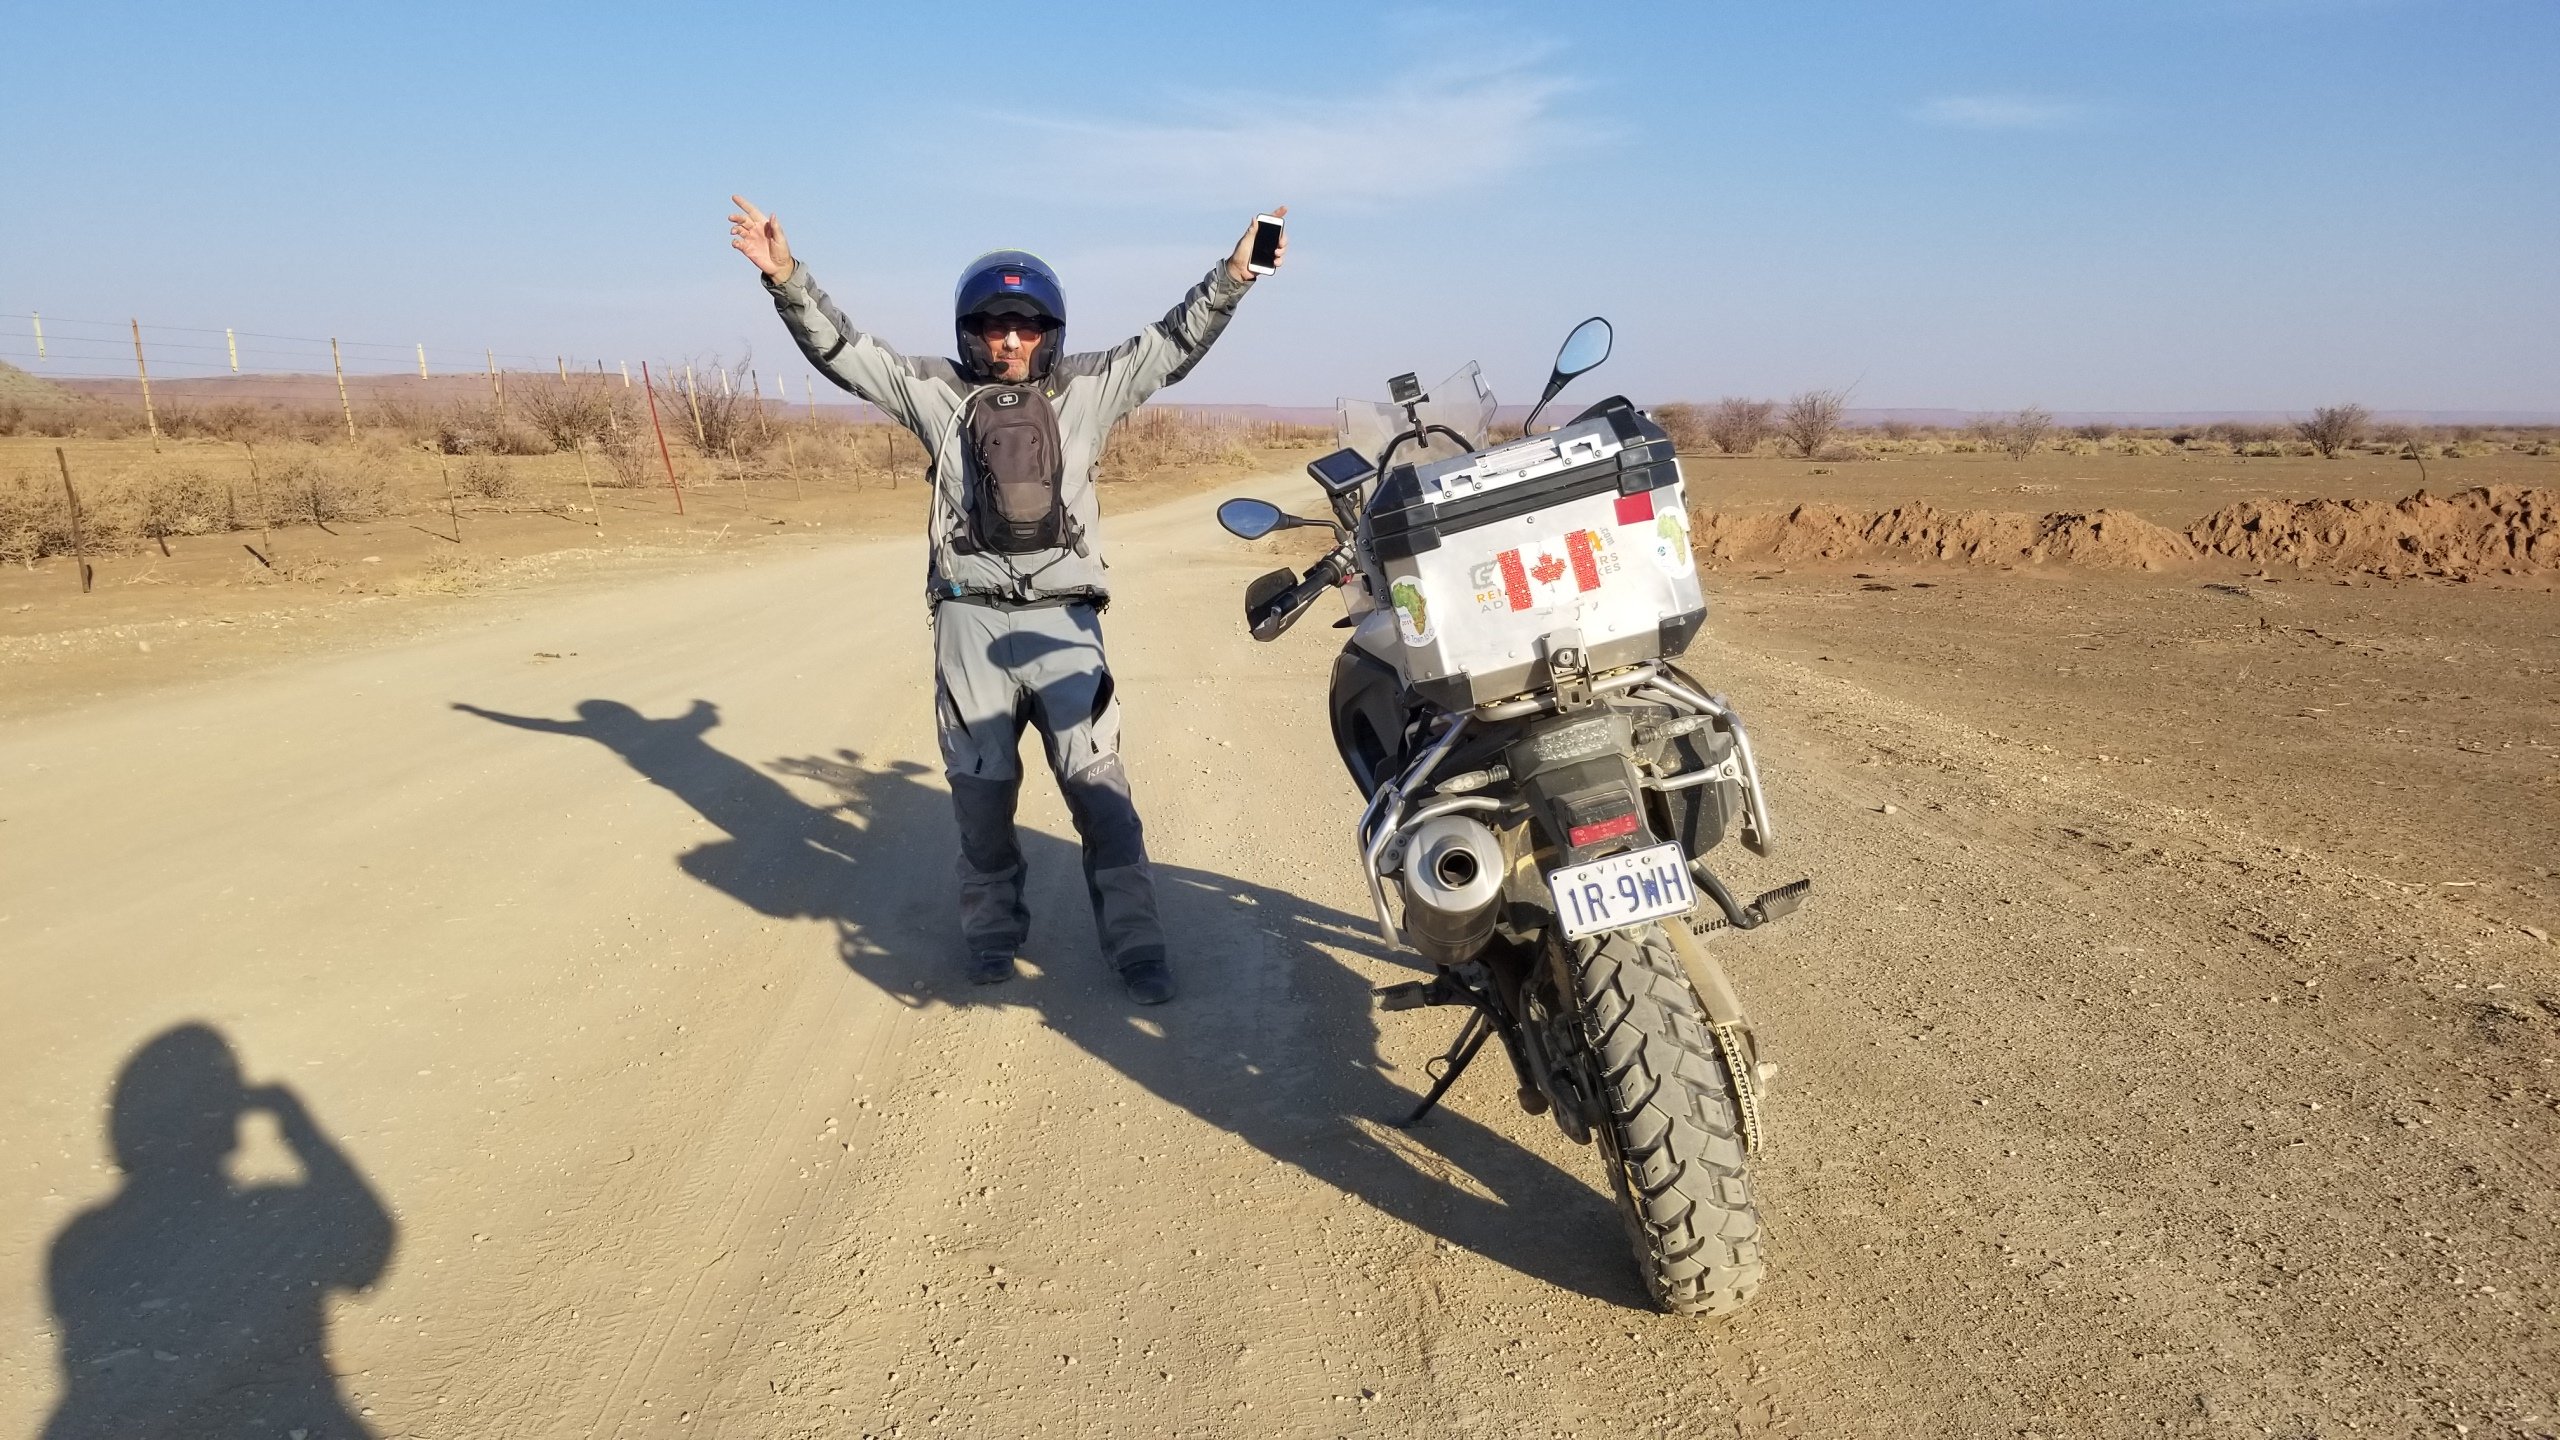 August 20, 2019 – Fish River Canyon to Luderitz Nest Hotel, Namibia